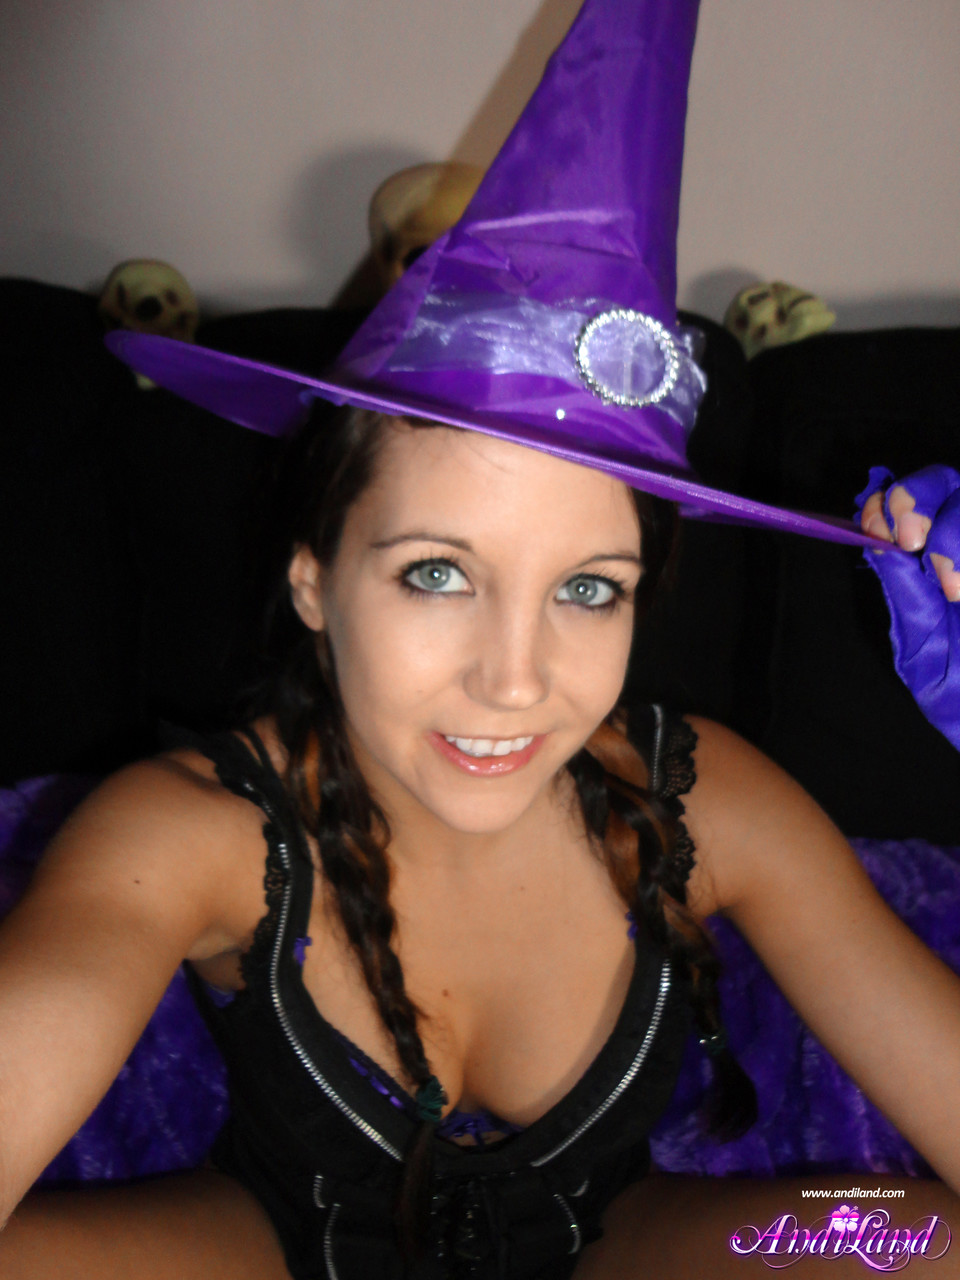 Teen amateur Andi Land teases during upskirt action in a Halloween outfit foto porno #428432666